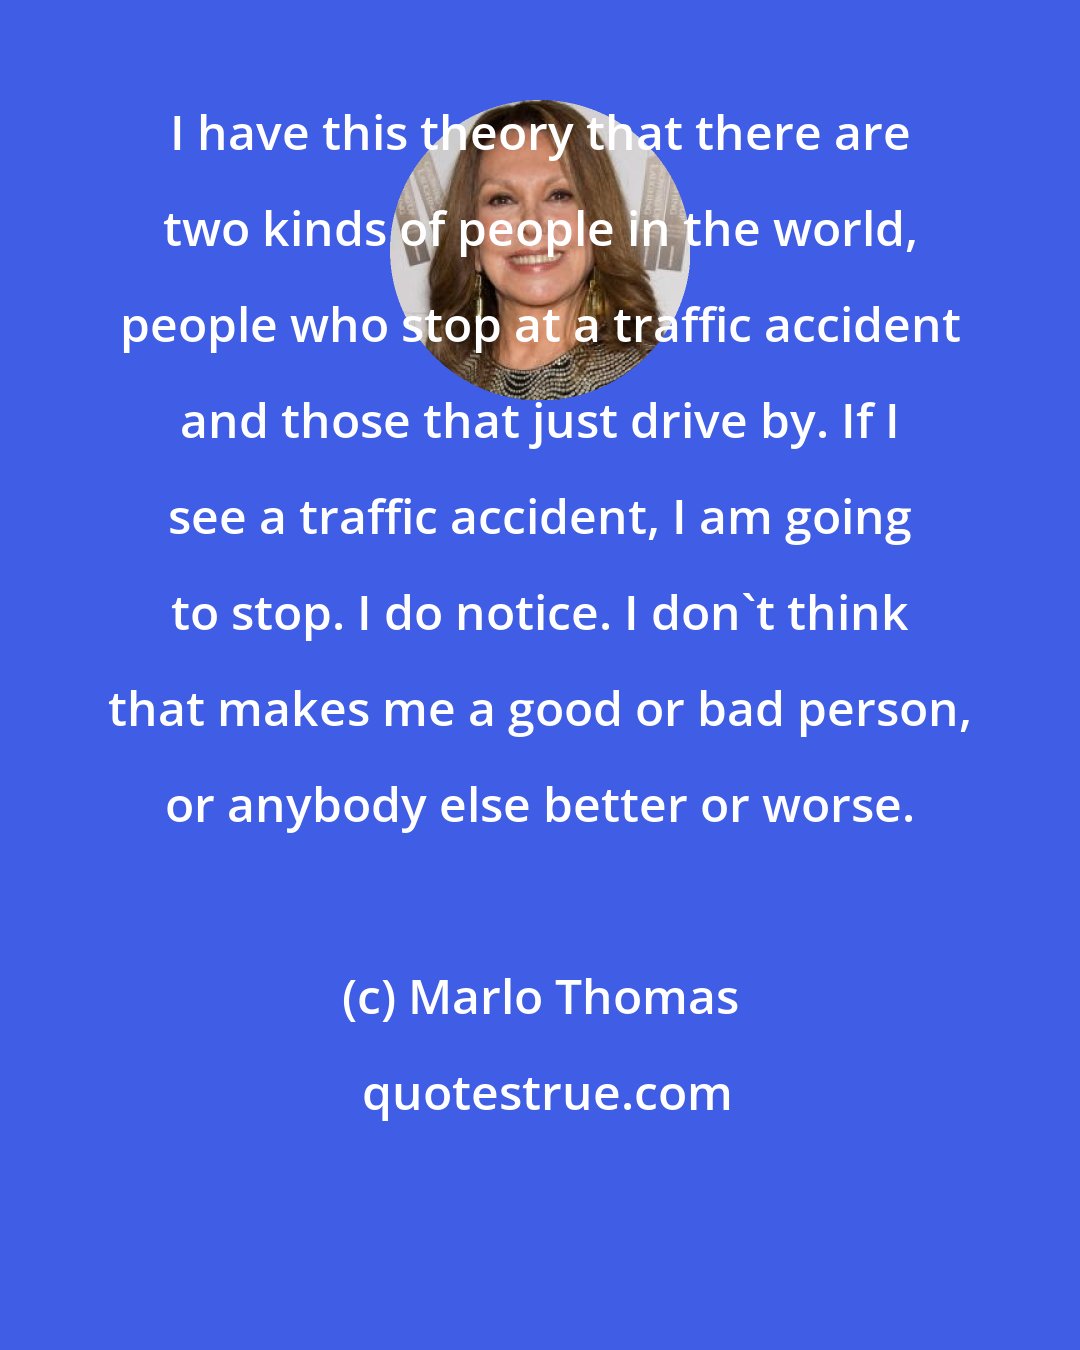 Marlo Thomas: I have this theory that there are two kinds of people in the world, people who stop at a traffic accident and those that just drive by. If I see a traffic accident, I am going to stop. I do notice. I don't think that makes me a good or bad person, or anybody else better or worse.